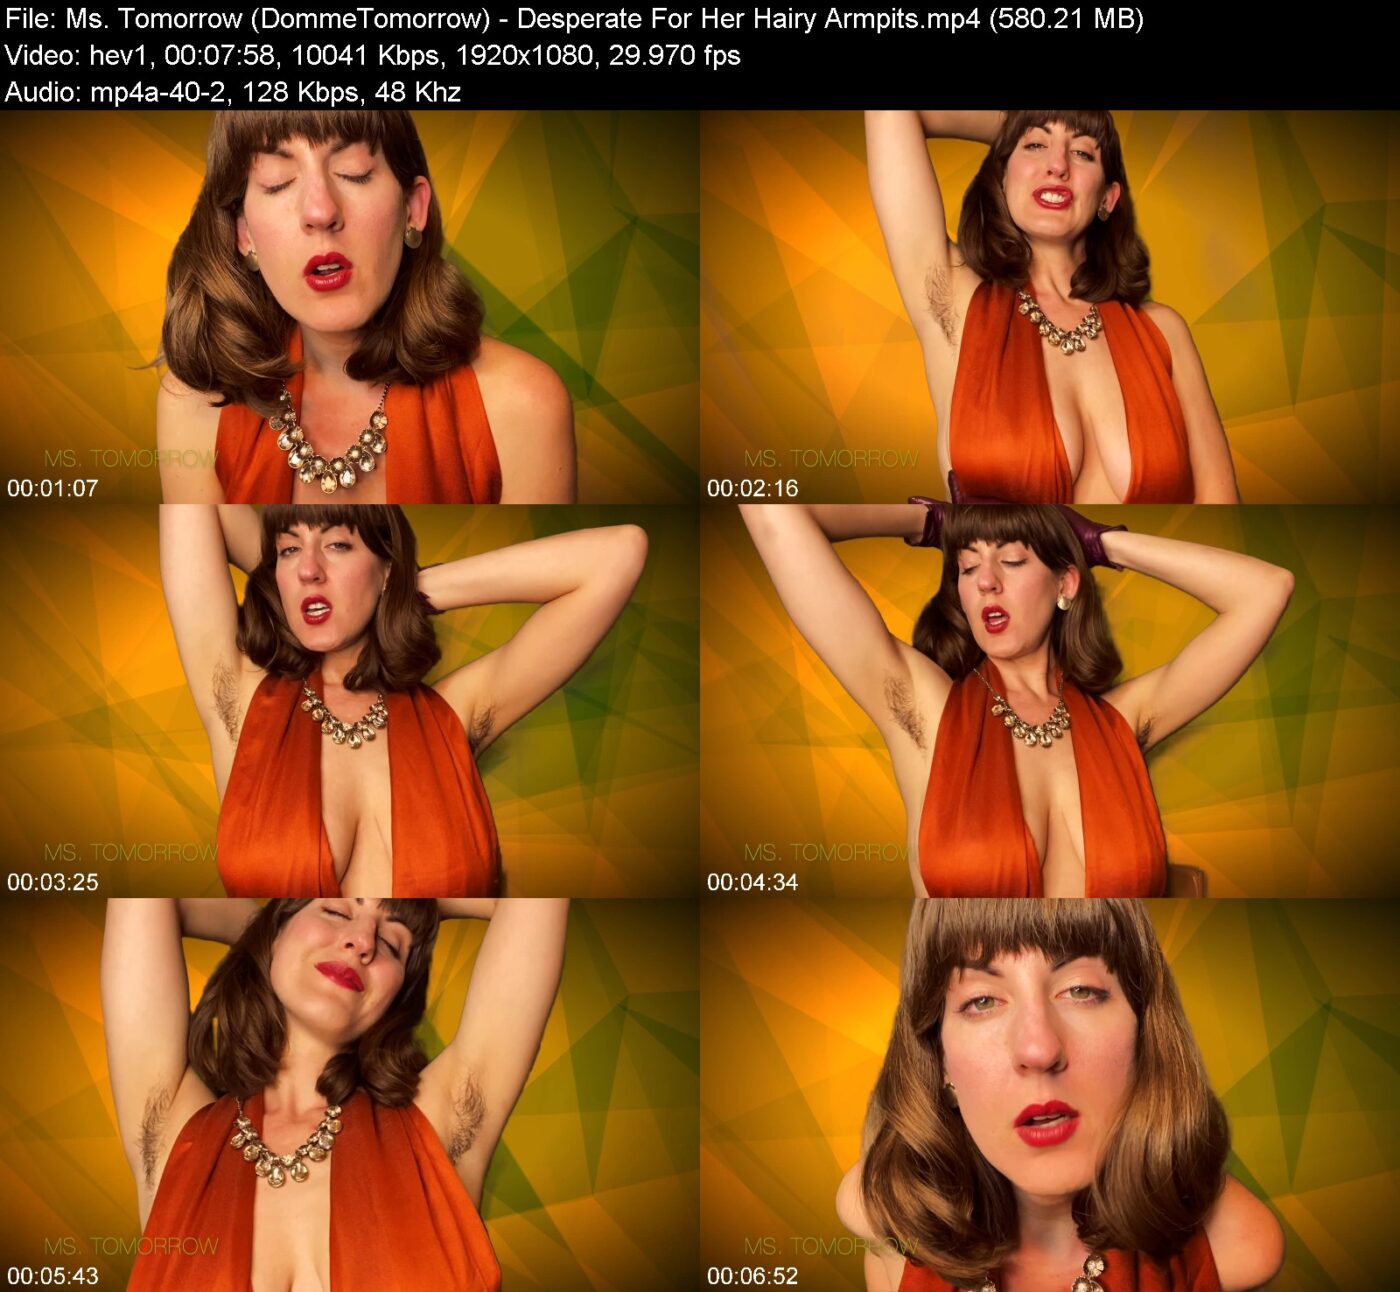 Actress: Ms. Tomorrow (DommeTomorrow). Title and Studio: Desperate For Her Hairy Armpits